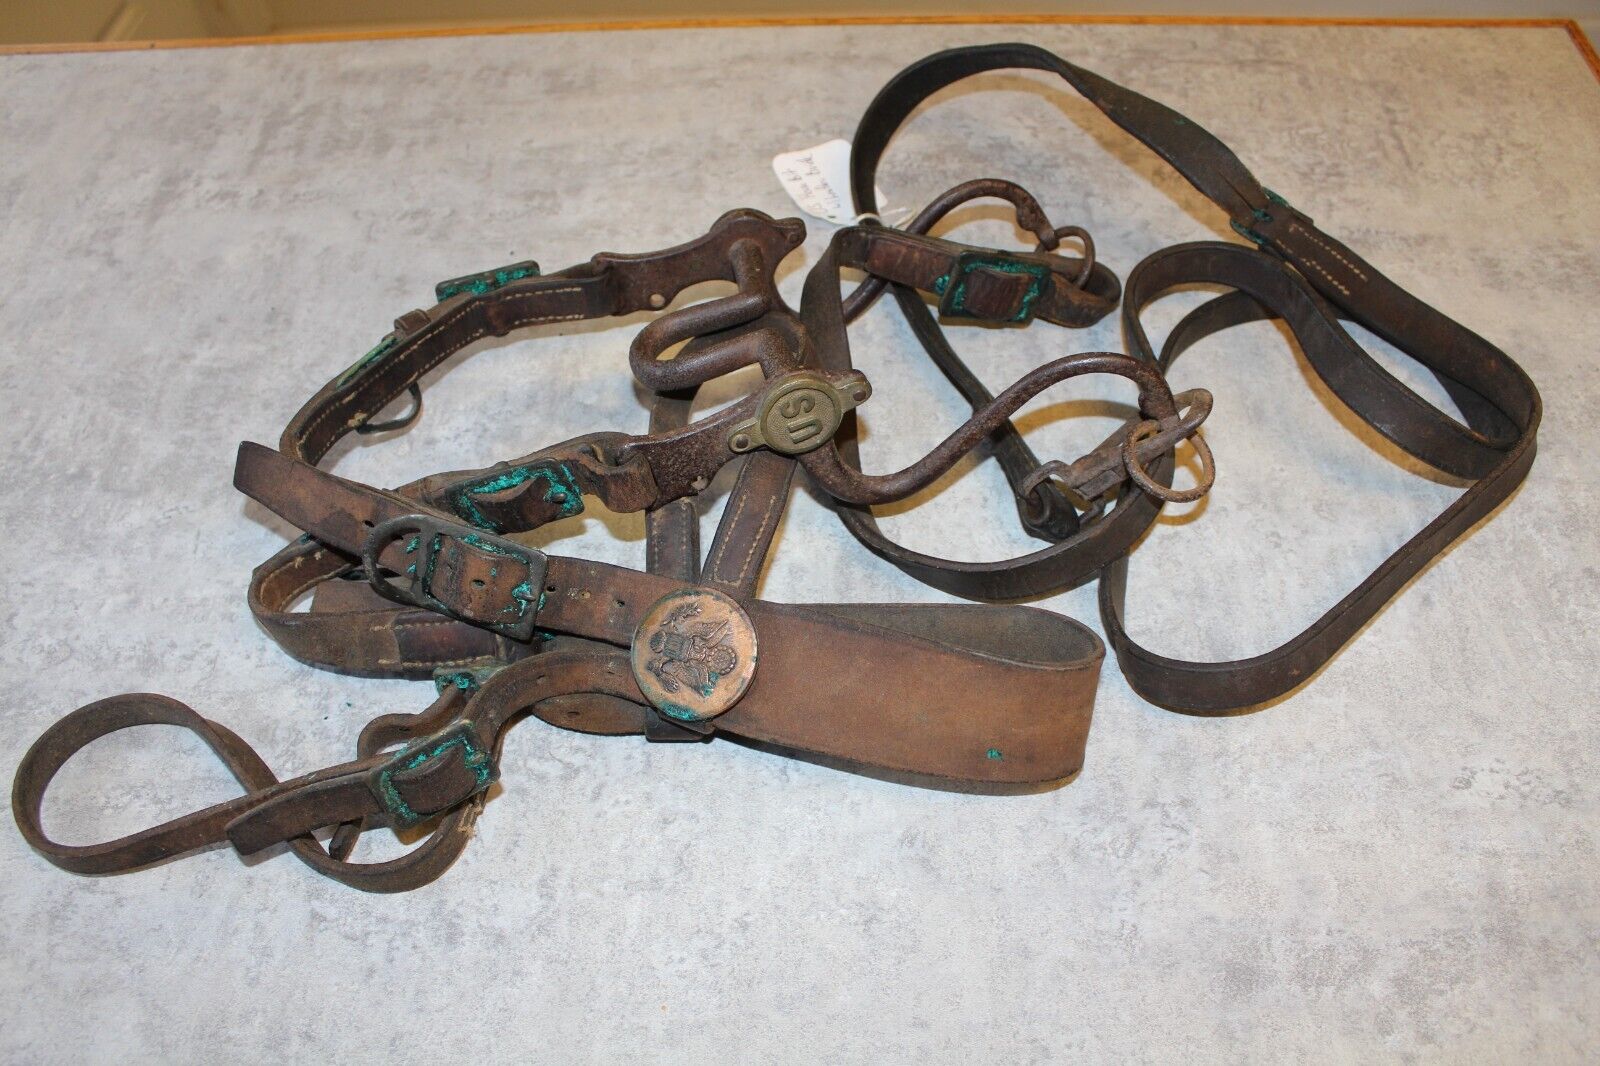 RARE WW1 US CALVARY U.S. HORSE BIT AND HARNESS WITH ROSSETES